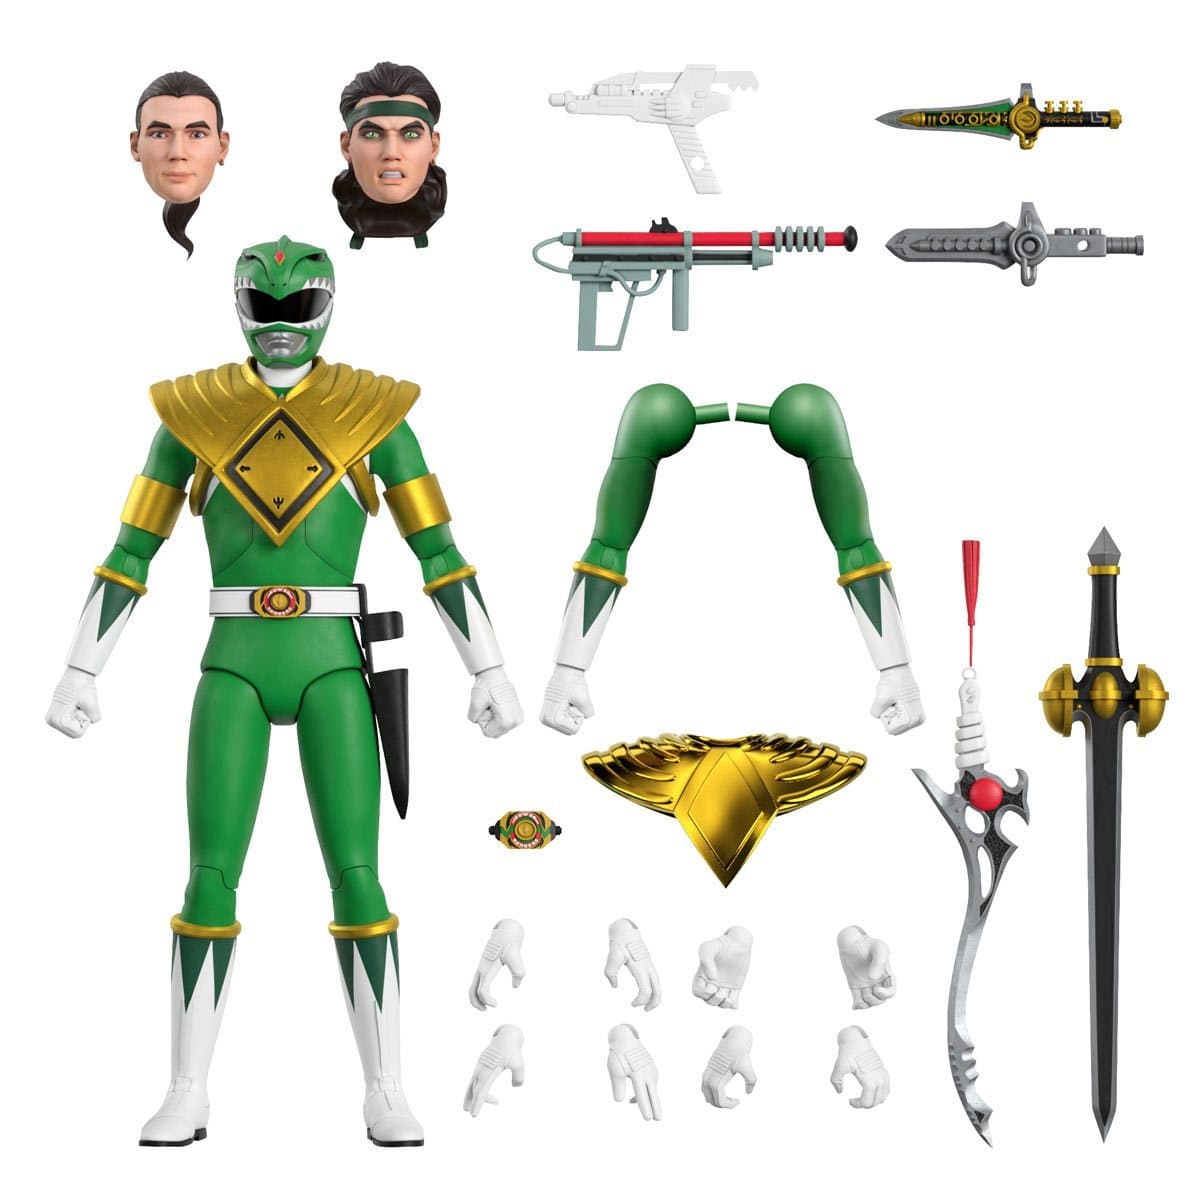 Power Rangers Ultimates Mighty Morphin Green Ranger 7-Inch Action Figure - Pop-O-Loco - Super7 Pre-Order